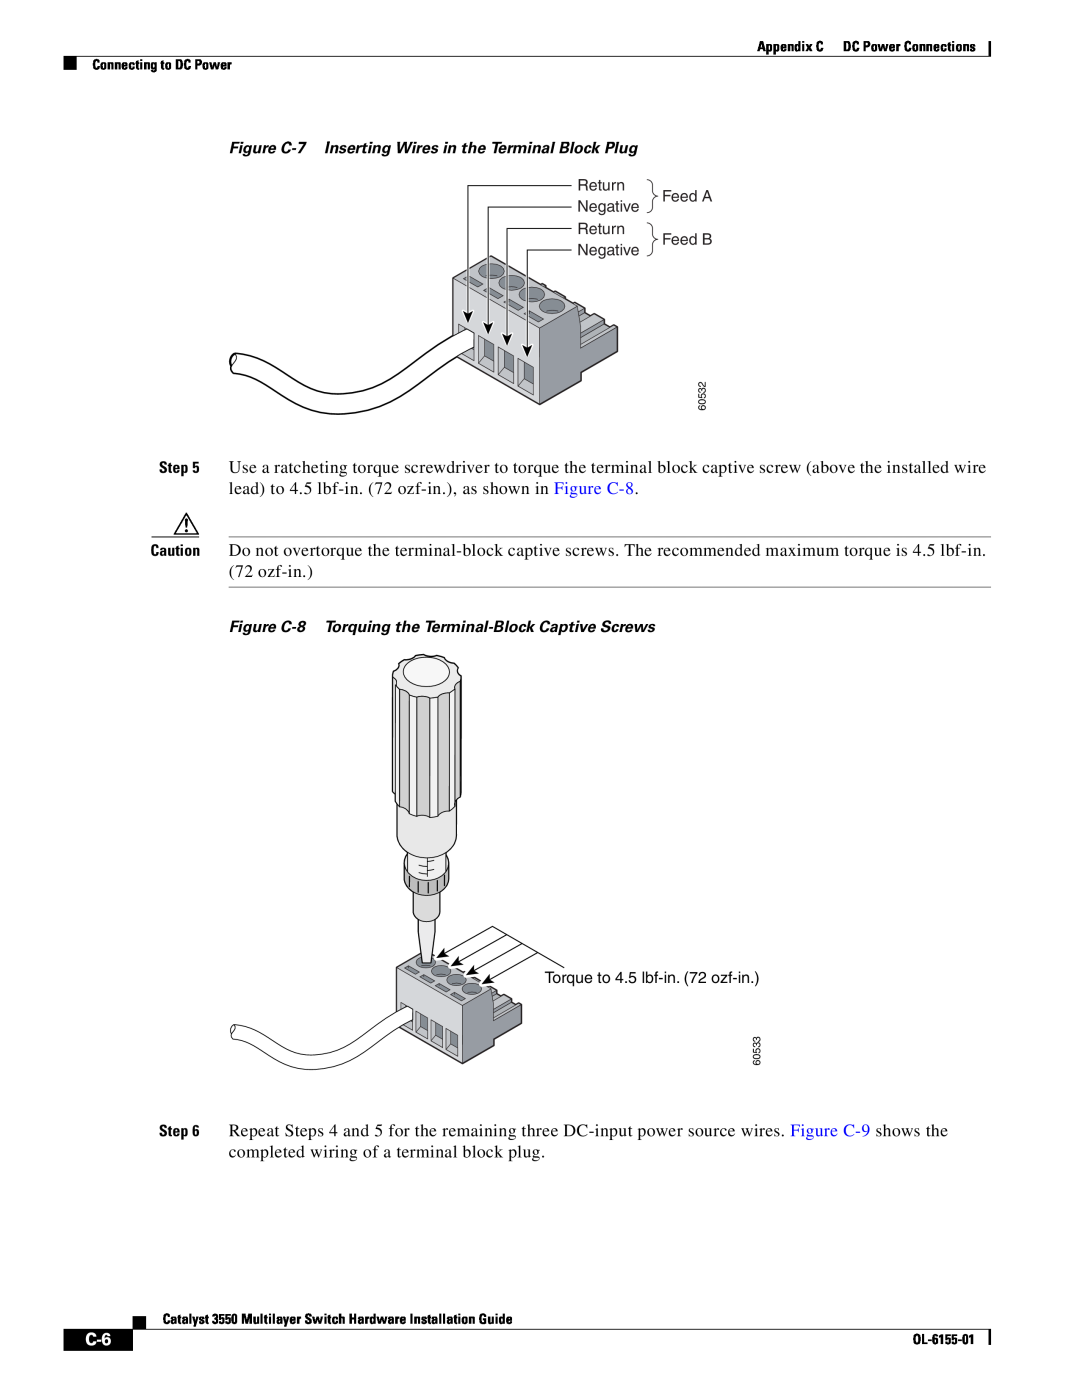 Cisco Systems 3550 manual Figure C-7 Inserting Wires in the Terminal Block Plug 